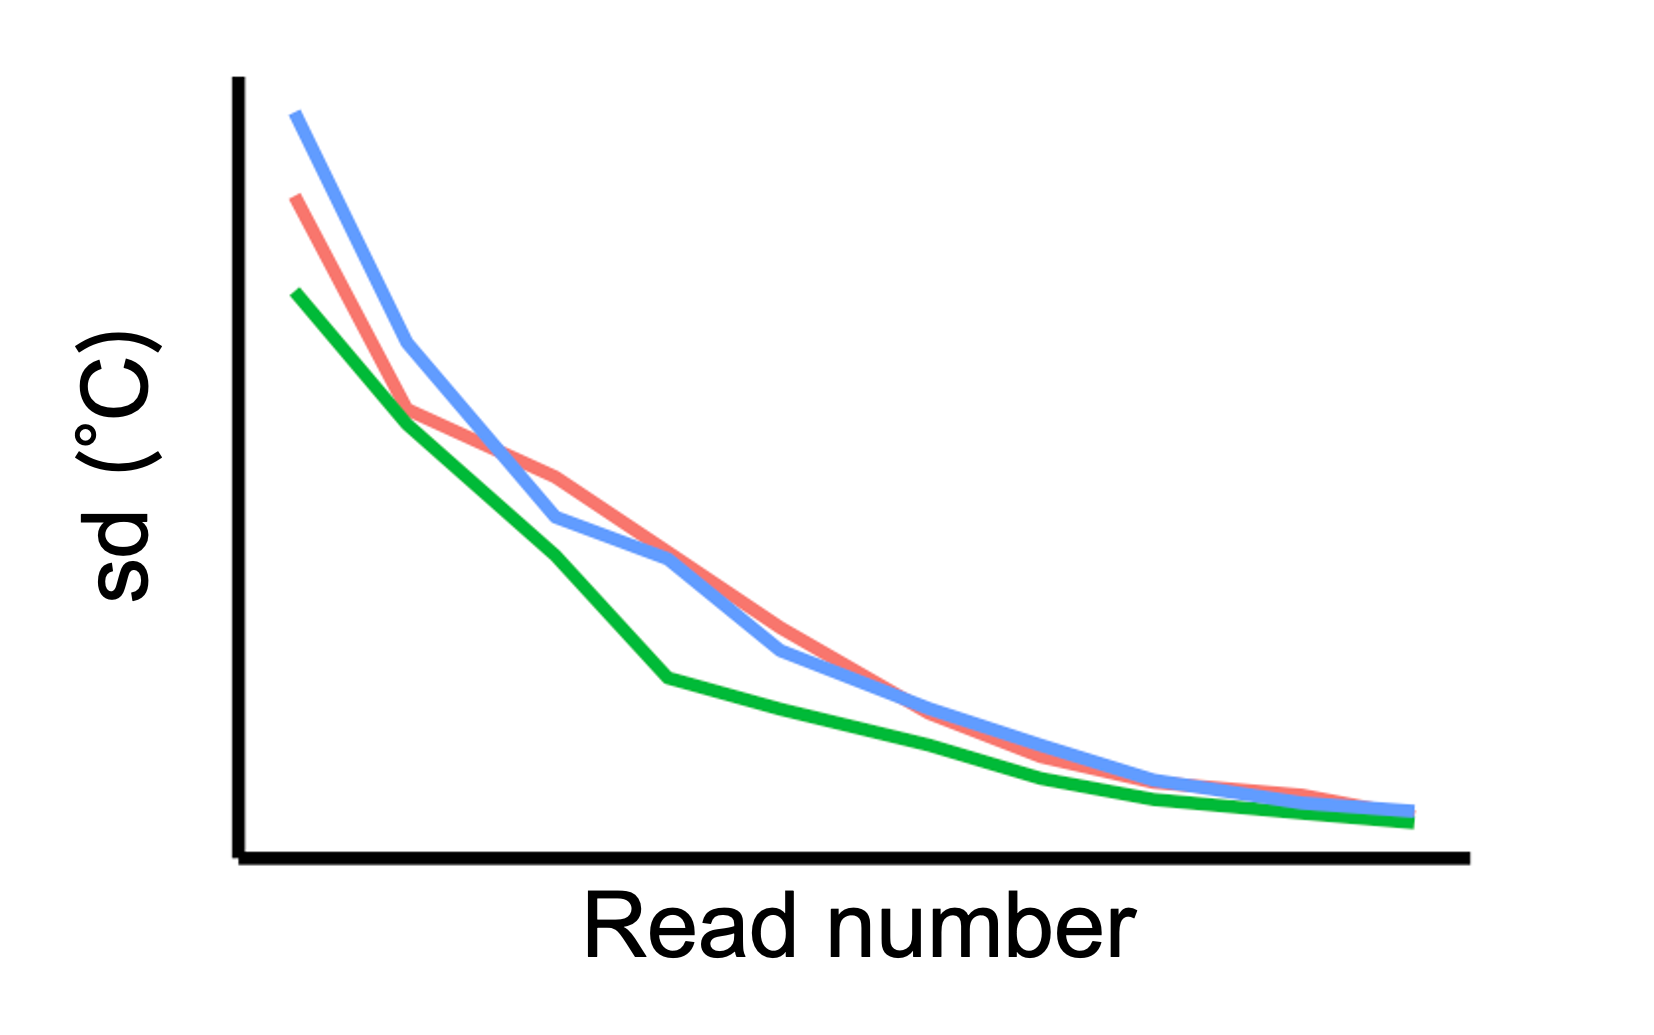 figure of sample size effect